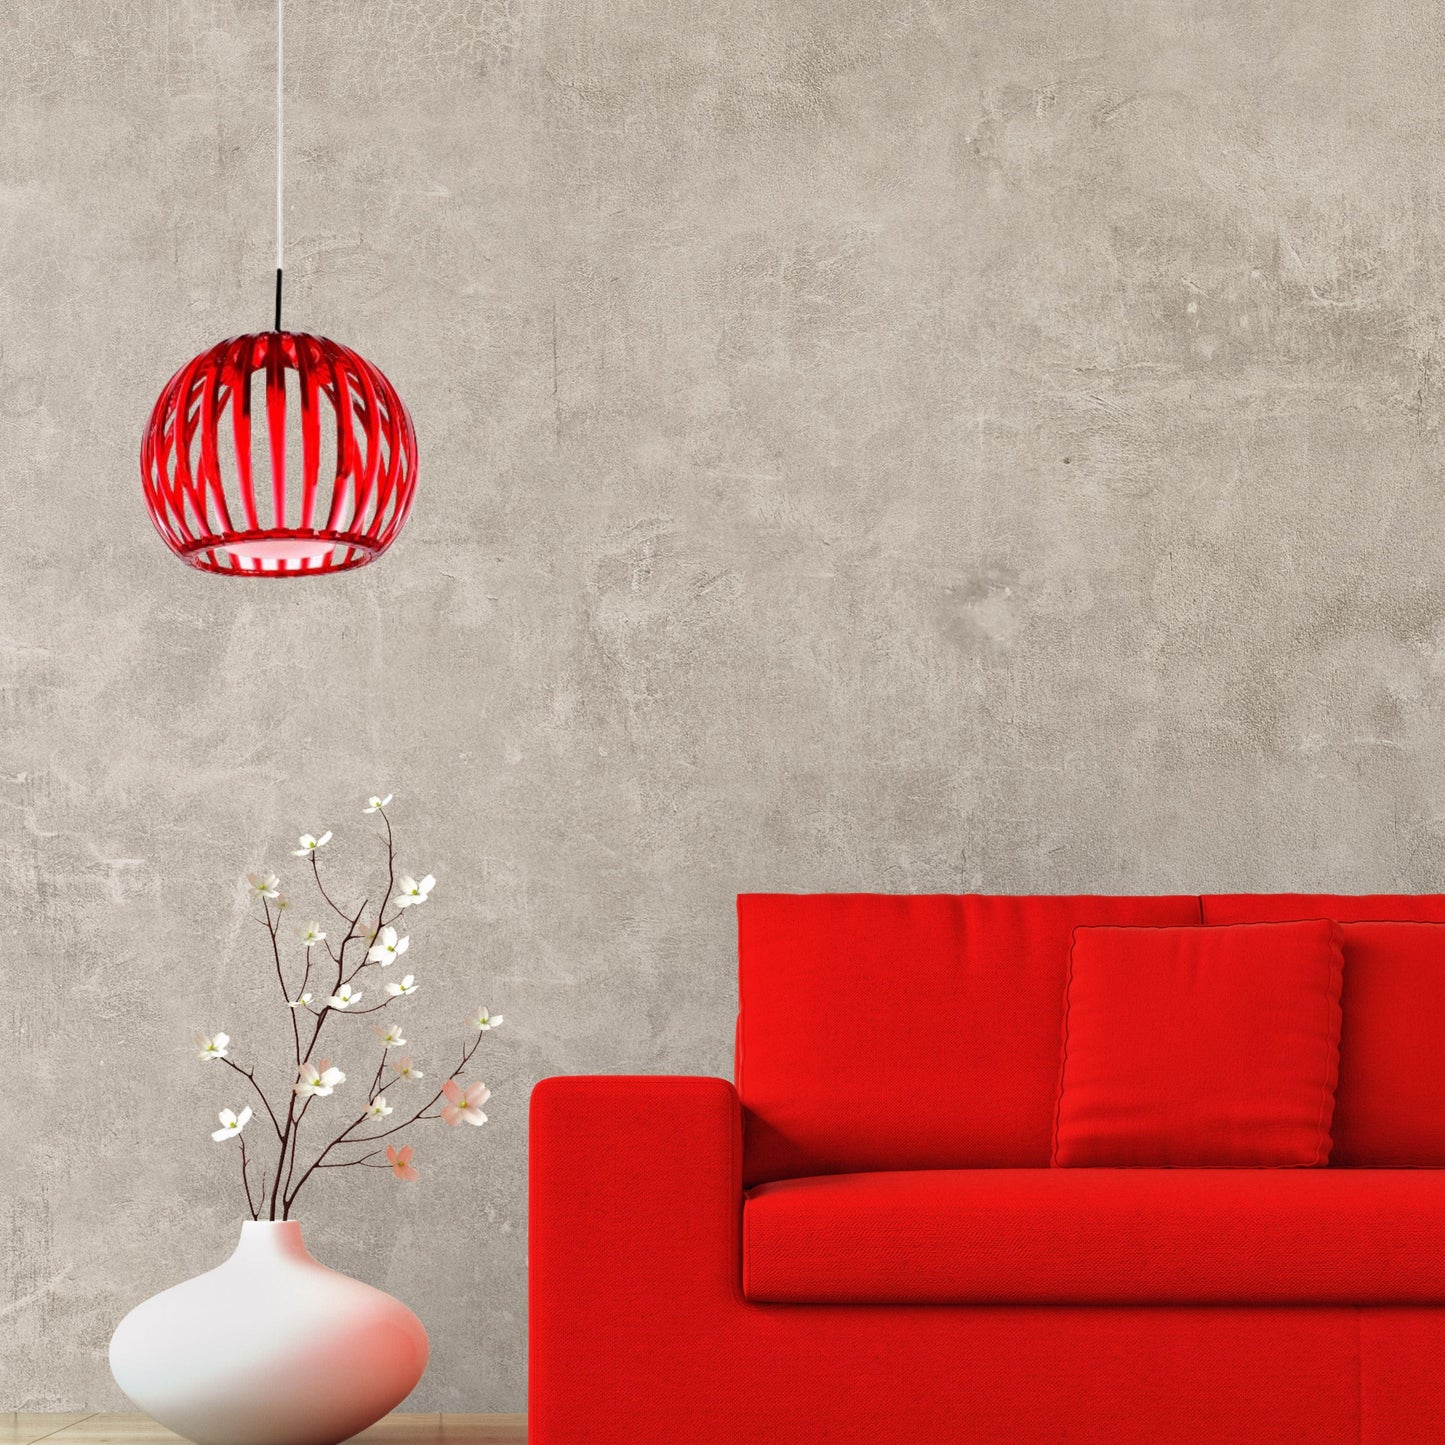 50% OFF LUPO Red Acrylic & Glass Pendant CLEARANCE WAS $104.00 - V&M IMPORTS Australia